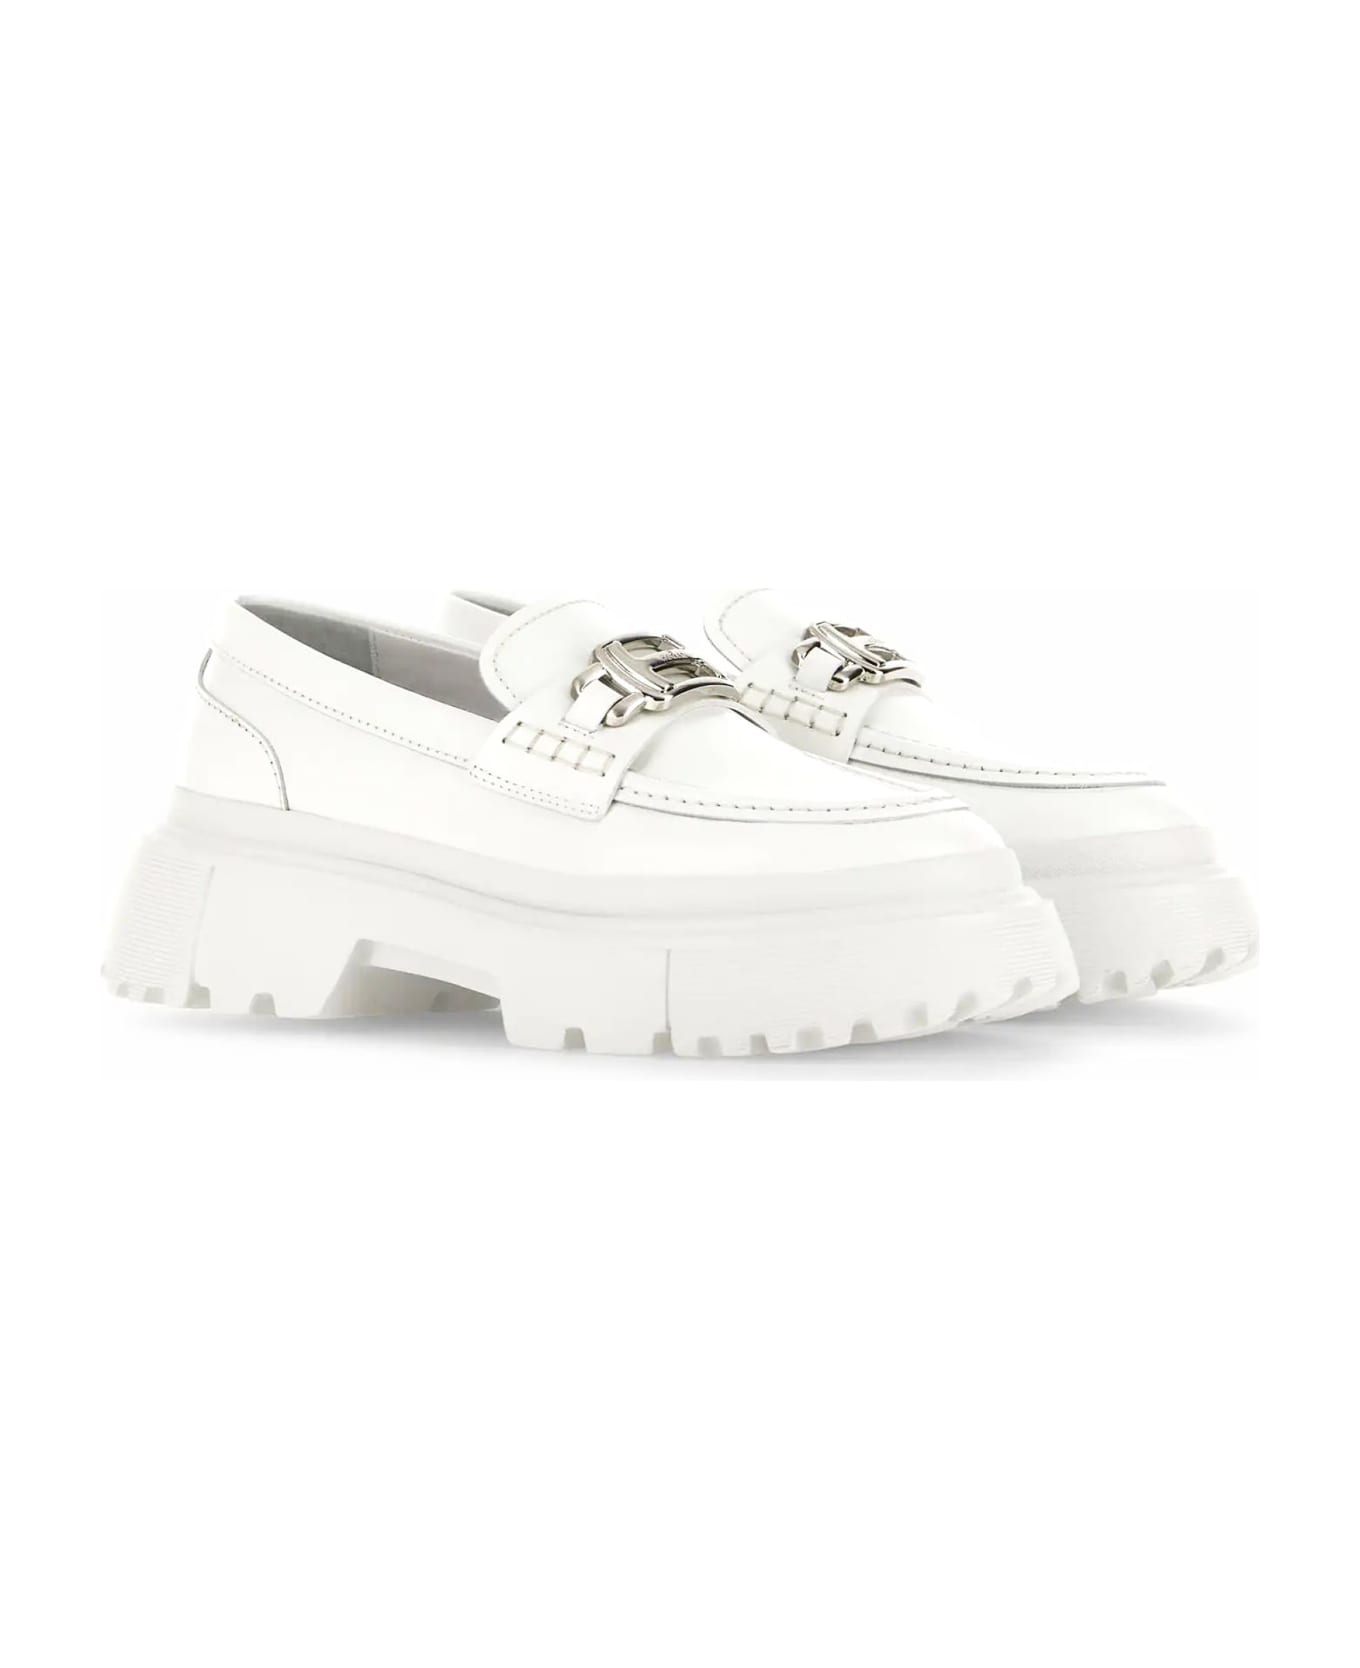 Hogan H629 Loafers - White